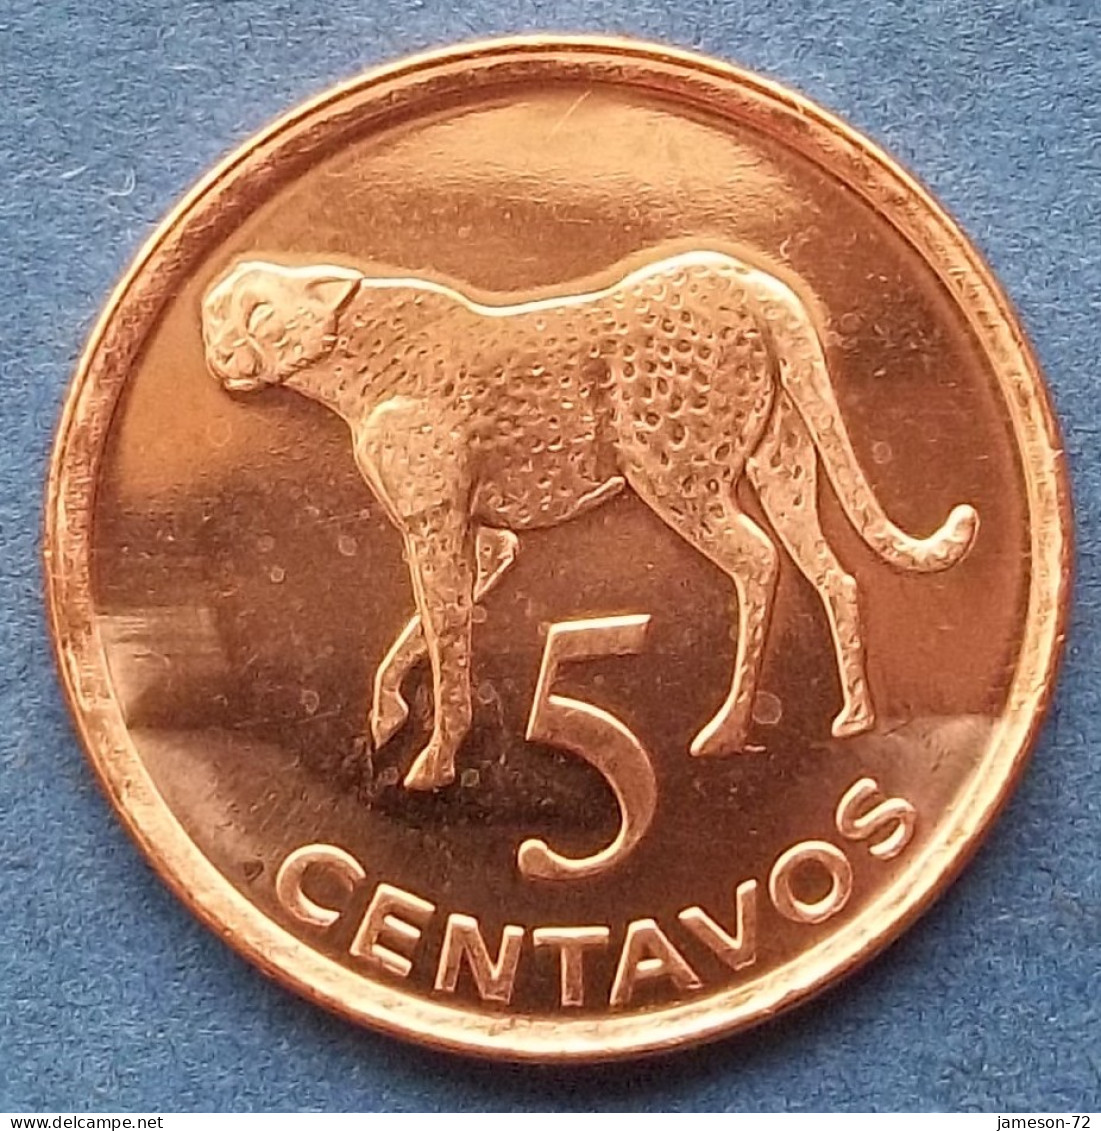 MOZAMBIQUE - 5 Centavos 2006 "Cheetah" KM# 133 Peoples Republic Reform Coinage (2006) - Edelweiss Coins - Mozambico